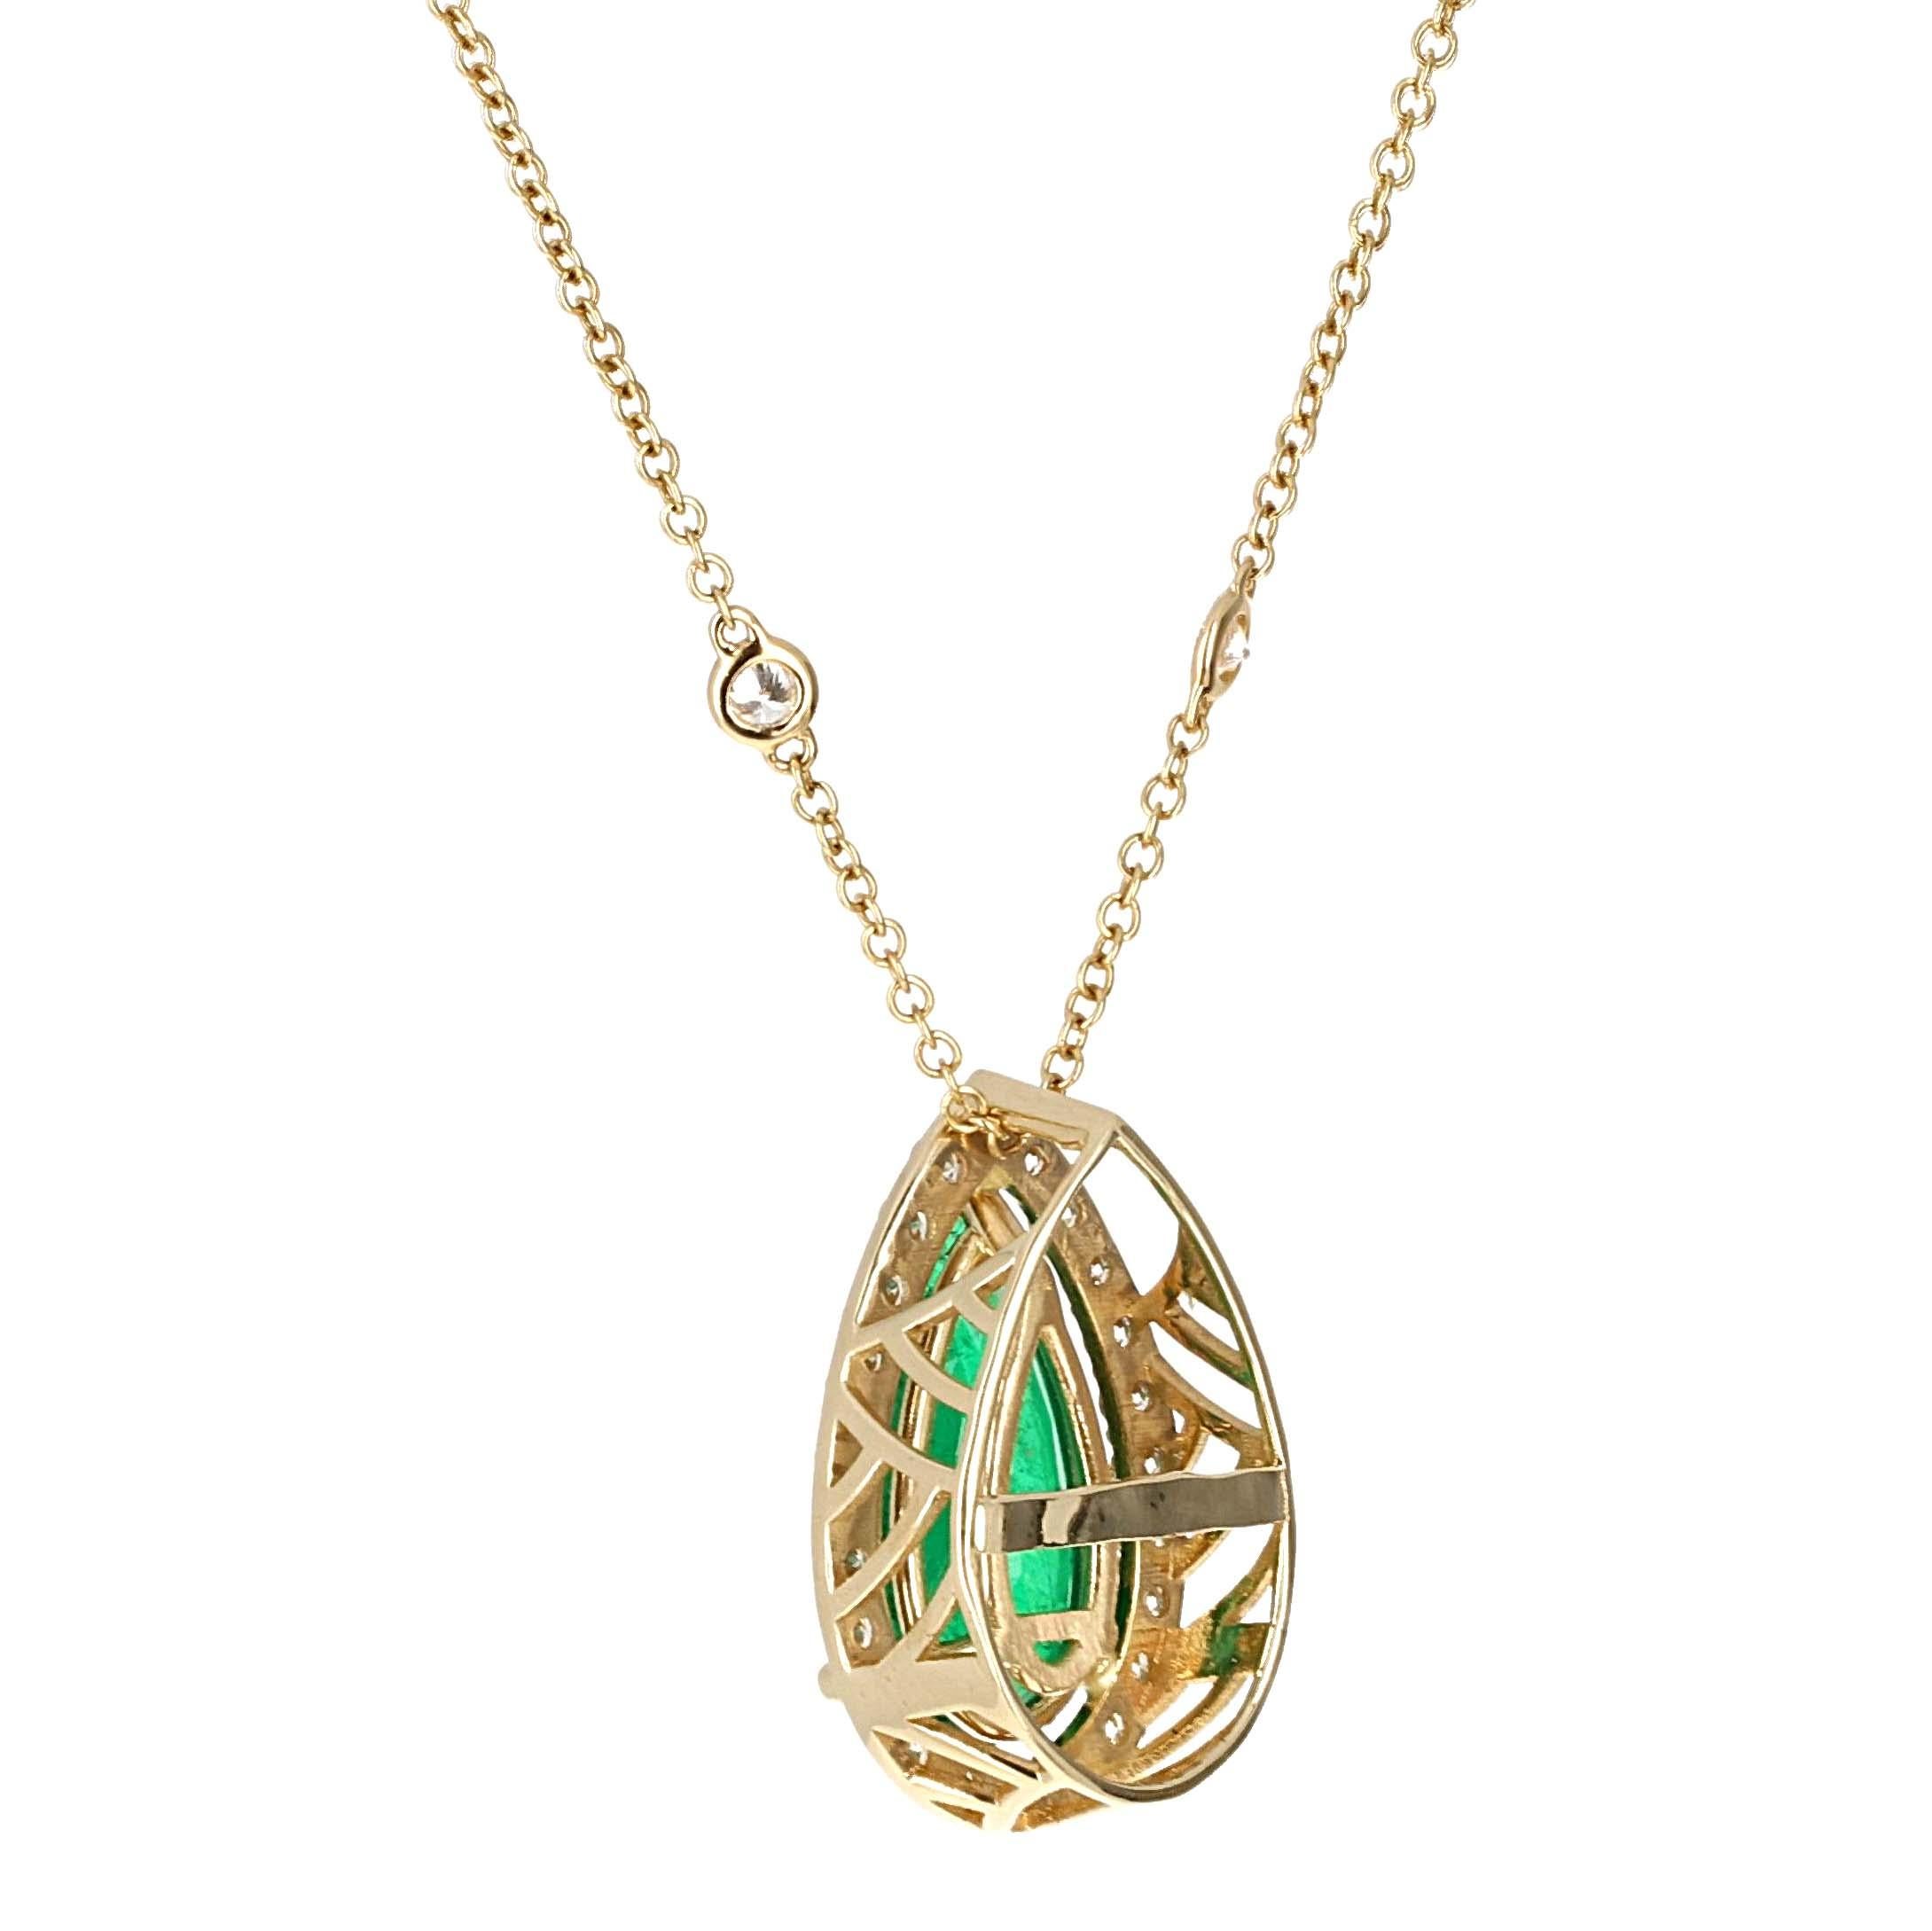 GIA Certified,  6.92 carat pear shape emerald and white diamond 14 karat yellow gold pendant. The pendant is crafted with meticulous attention to detail showcasing a geometric design on the side. This lively emerald is set in 14 karat yellow gold